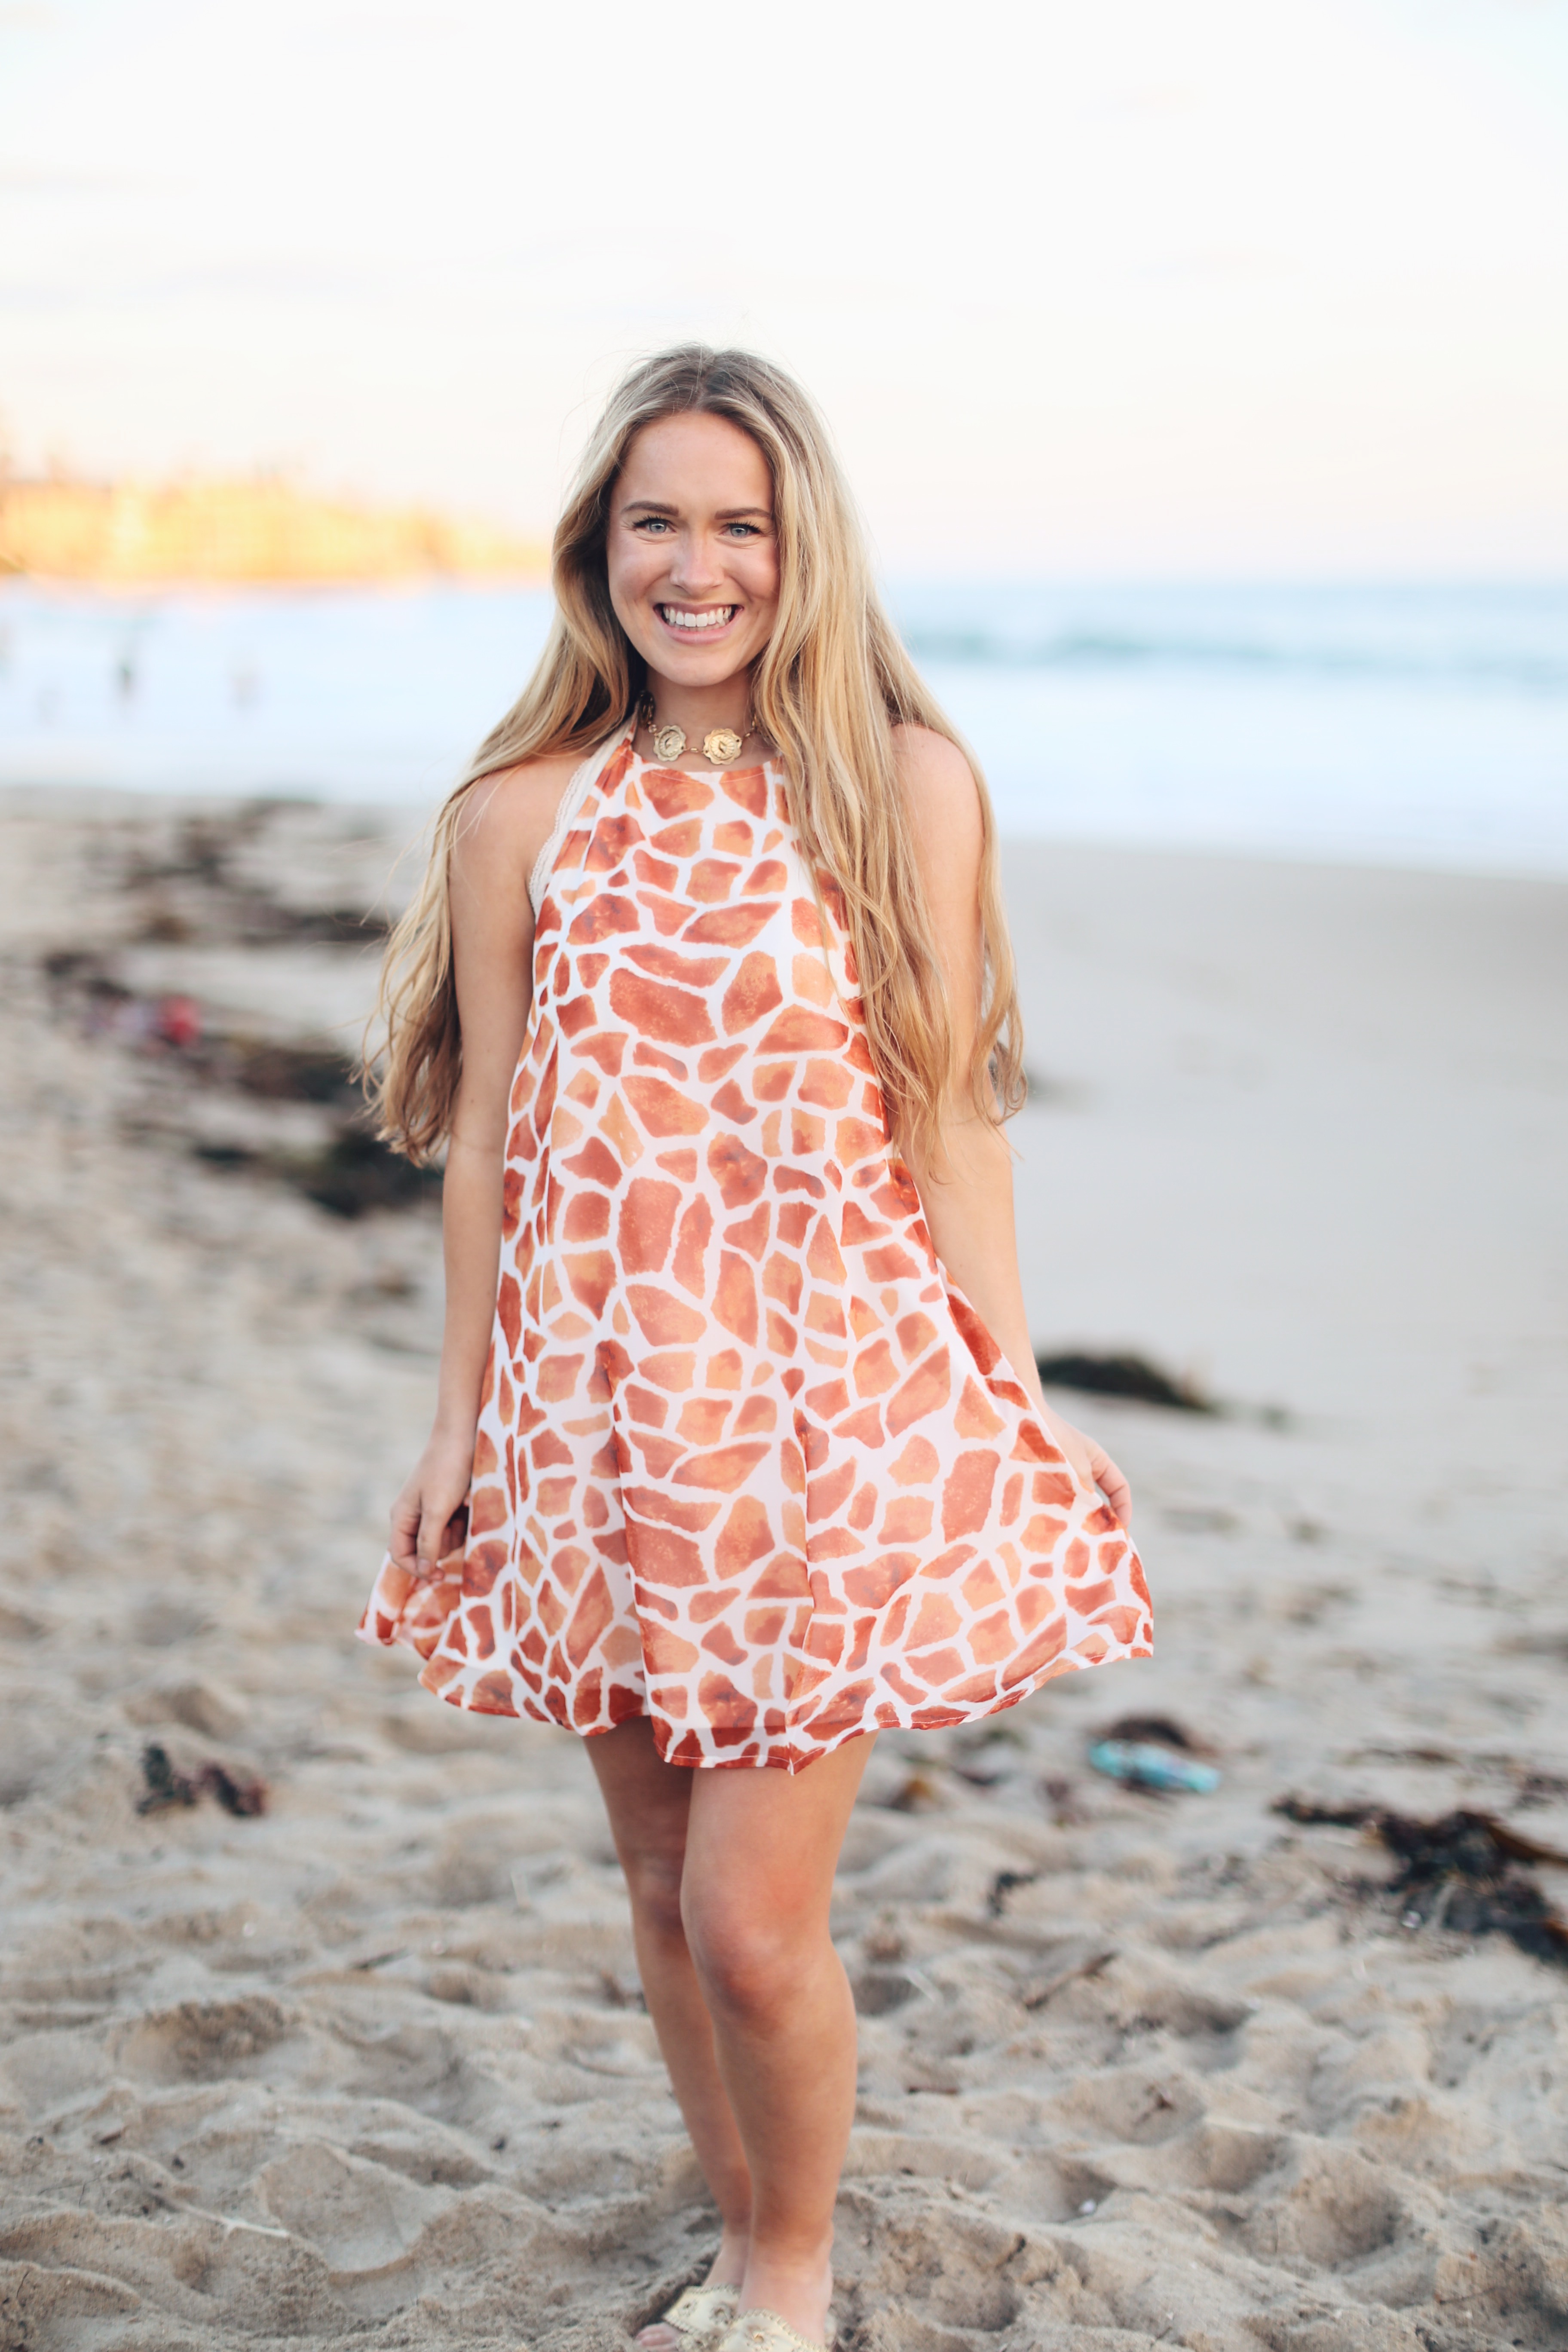 Spotted by the Sea – Mackenzie Kendall